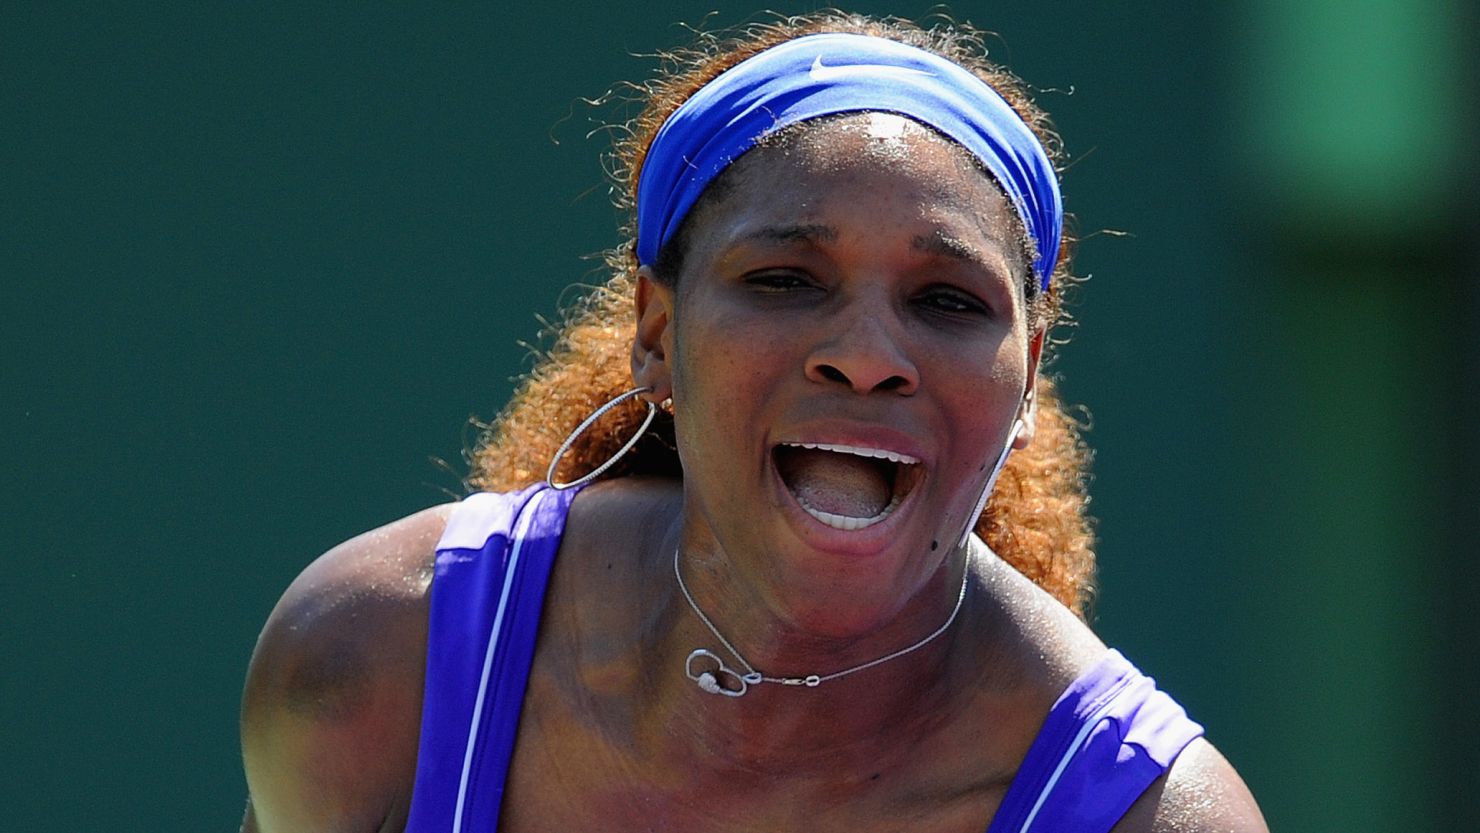 Serena Williams celebrates defeating Shuai Zhang in her first match since the Australian Open.